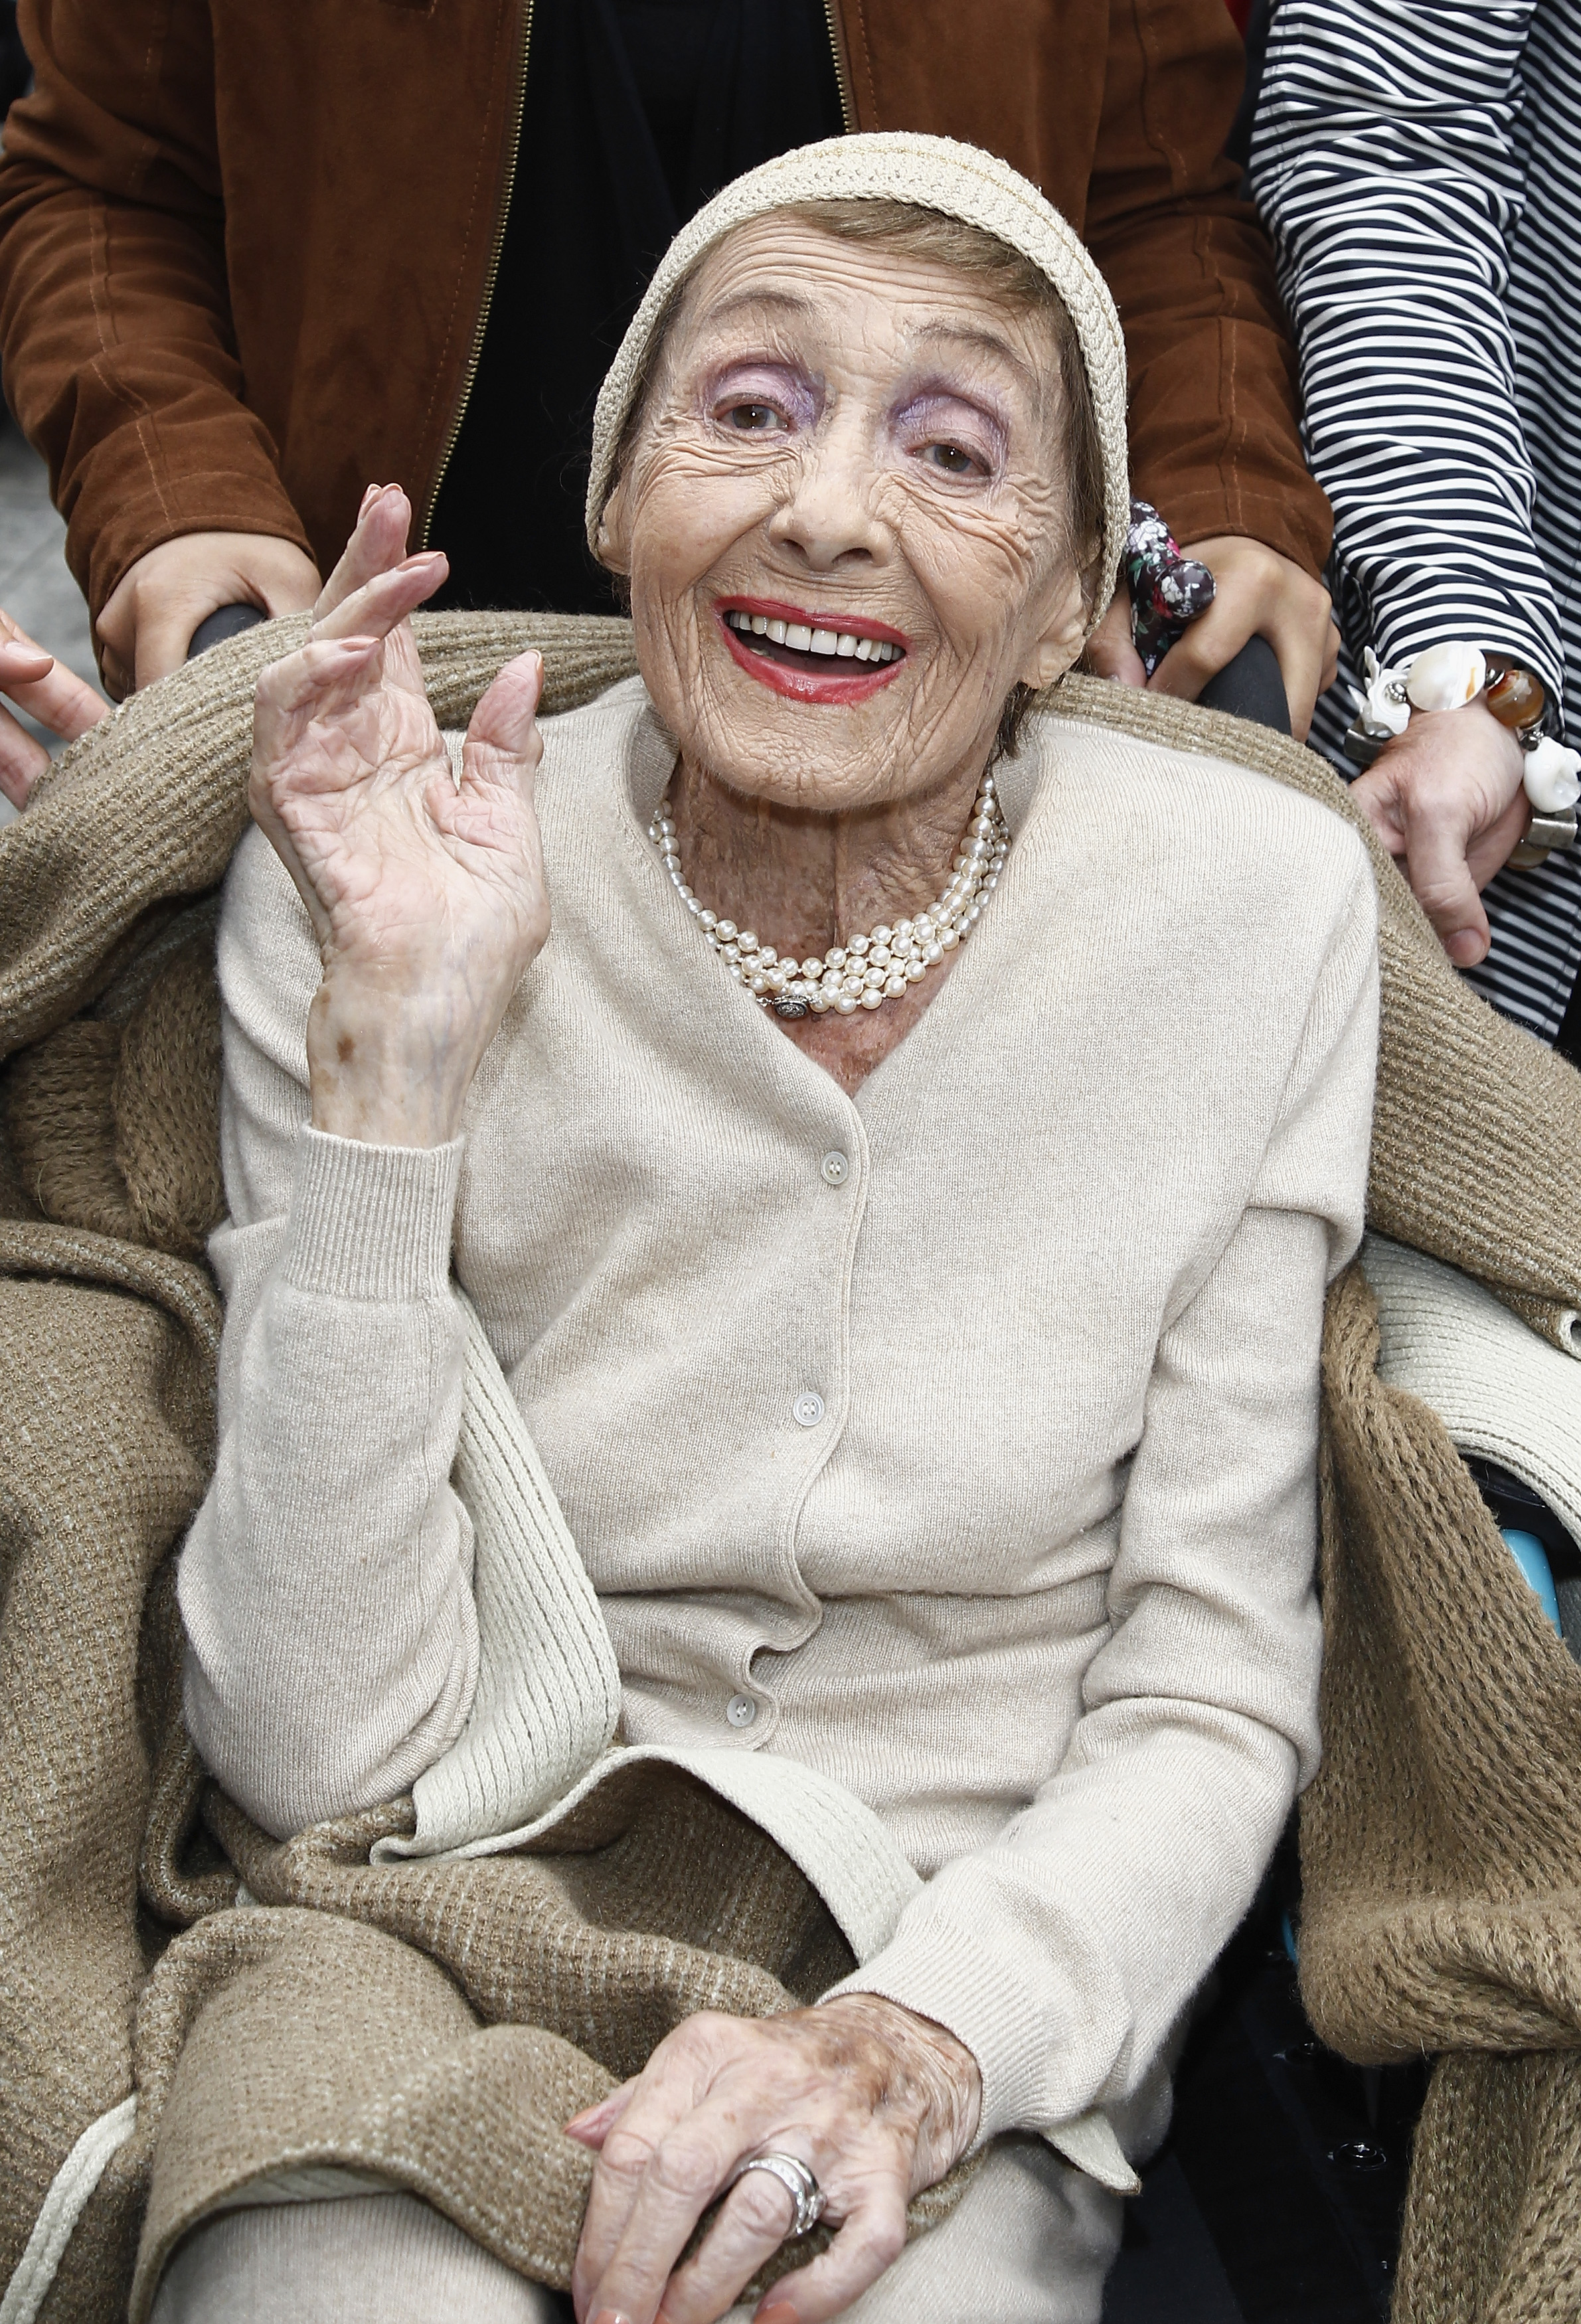 Luise Rainer at a ceremony with a Star on the Berlin Walk of Fame in Berlin, Germany on Sep. 5, 2011.